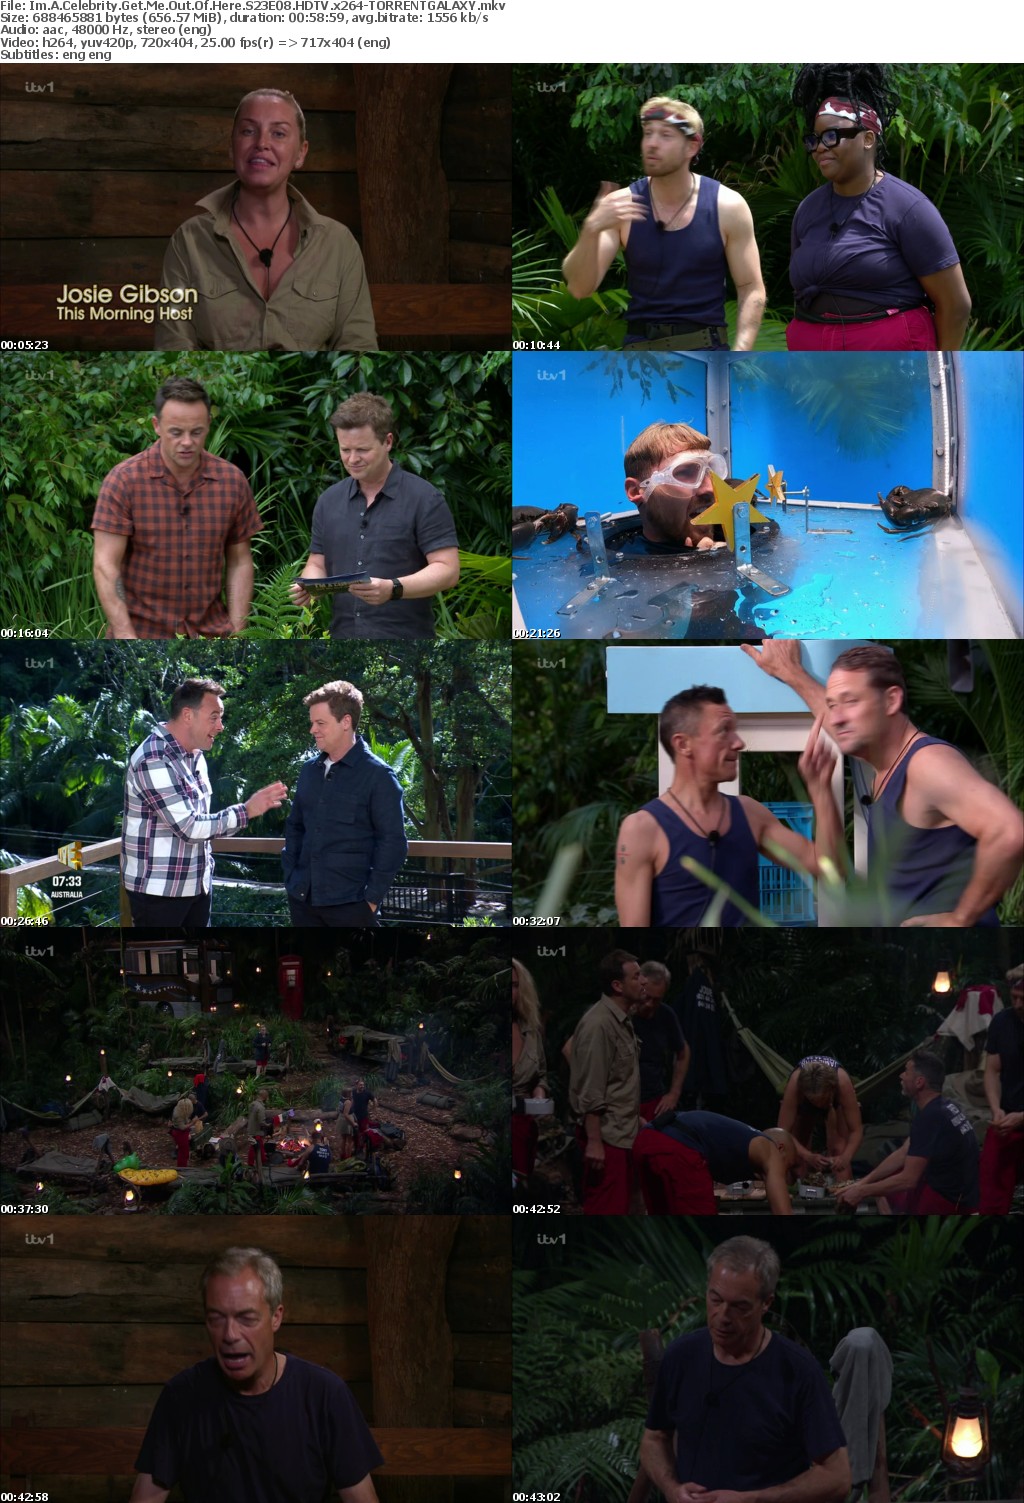 Im A Celebrity Get Me Out Of Here S23E08 HDTV x264-GALAXY